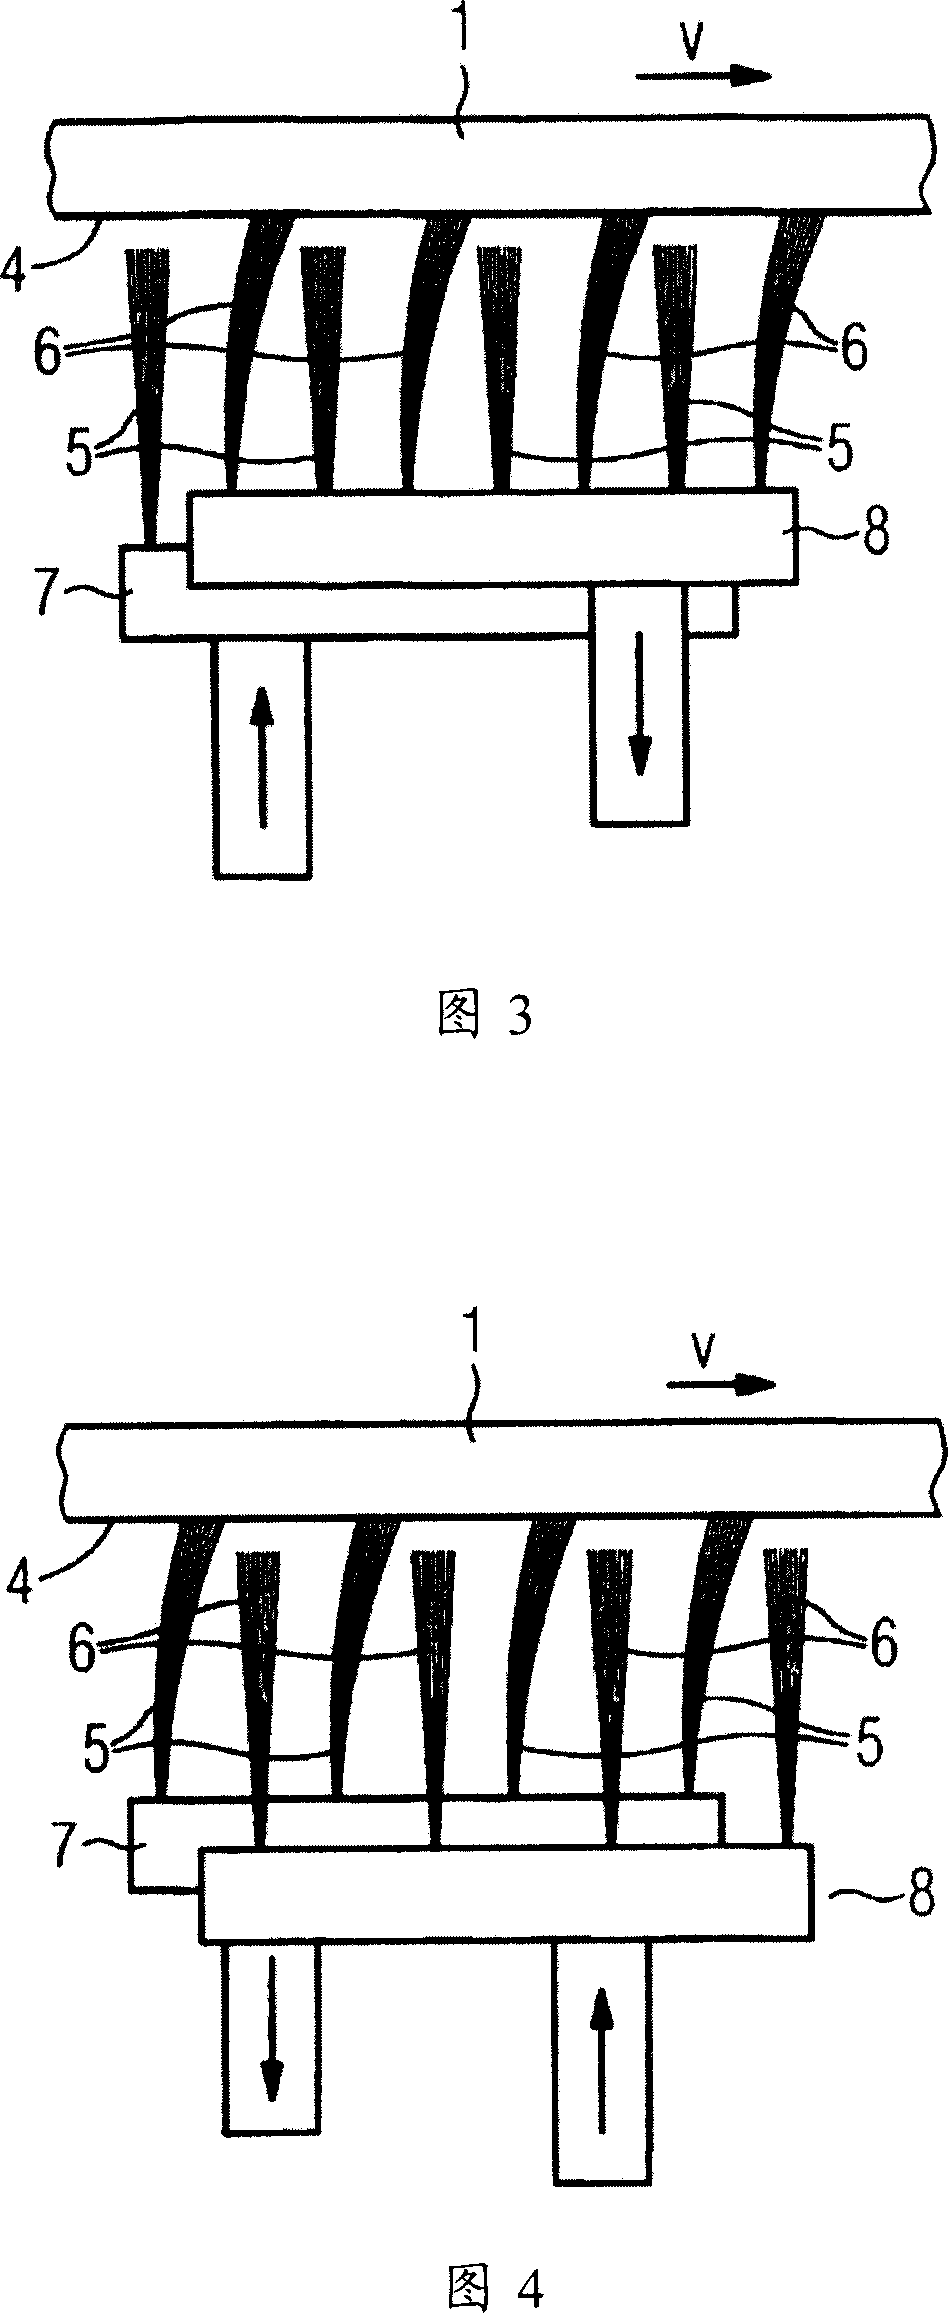 Device for placing an object